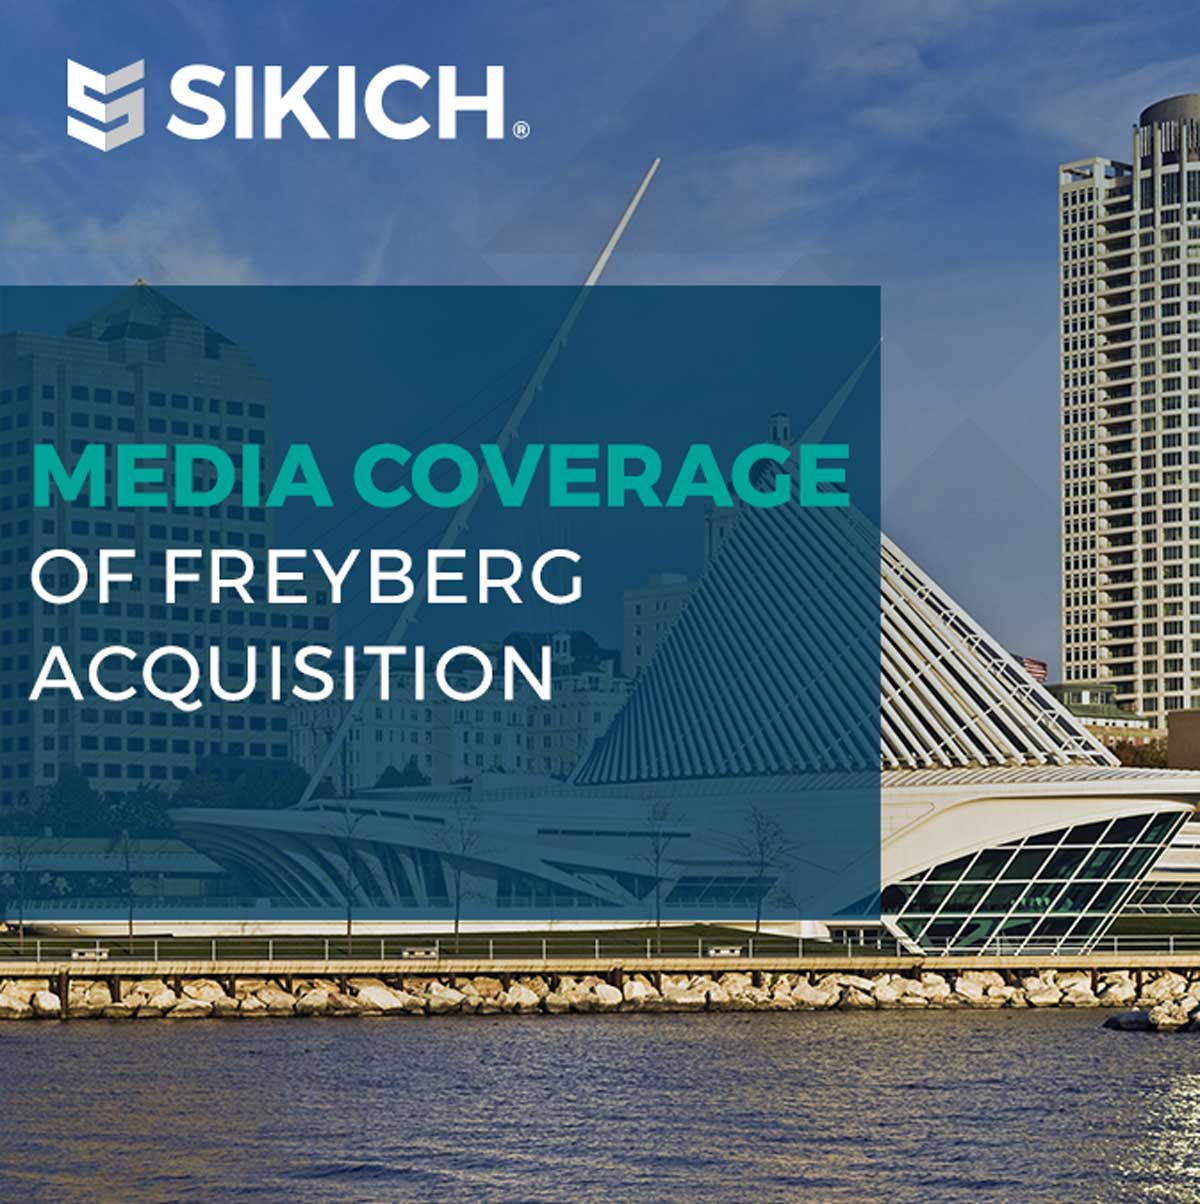 An image of a Milwaukee background with the text Media coverage of Freyberg acquisition across the image